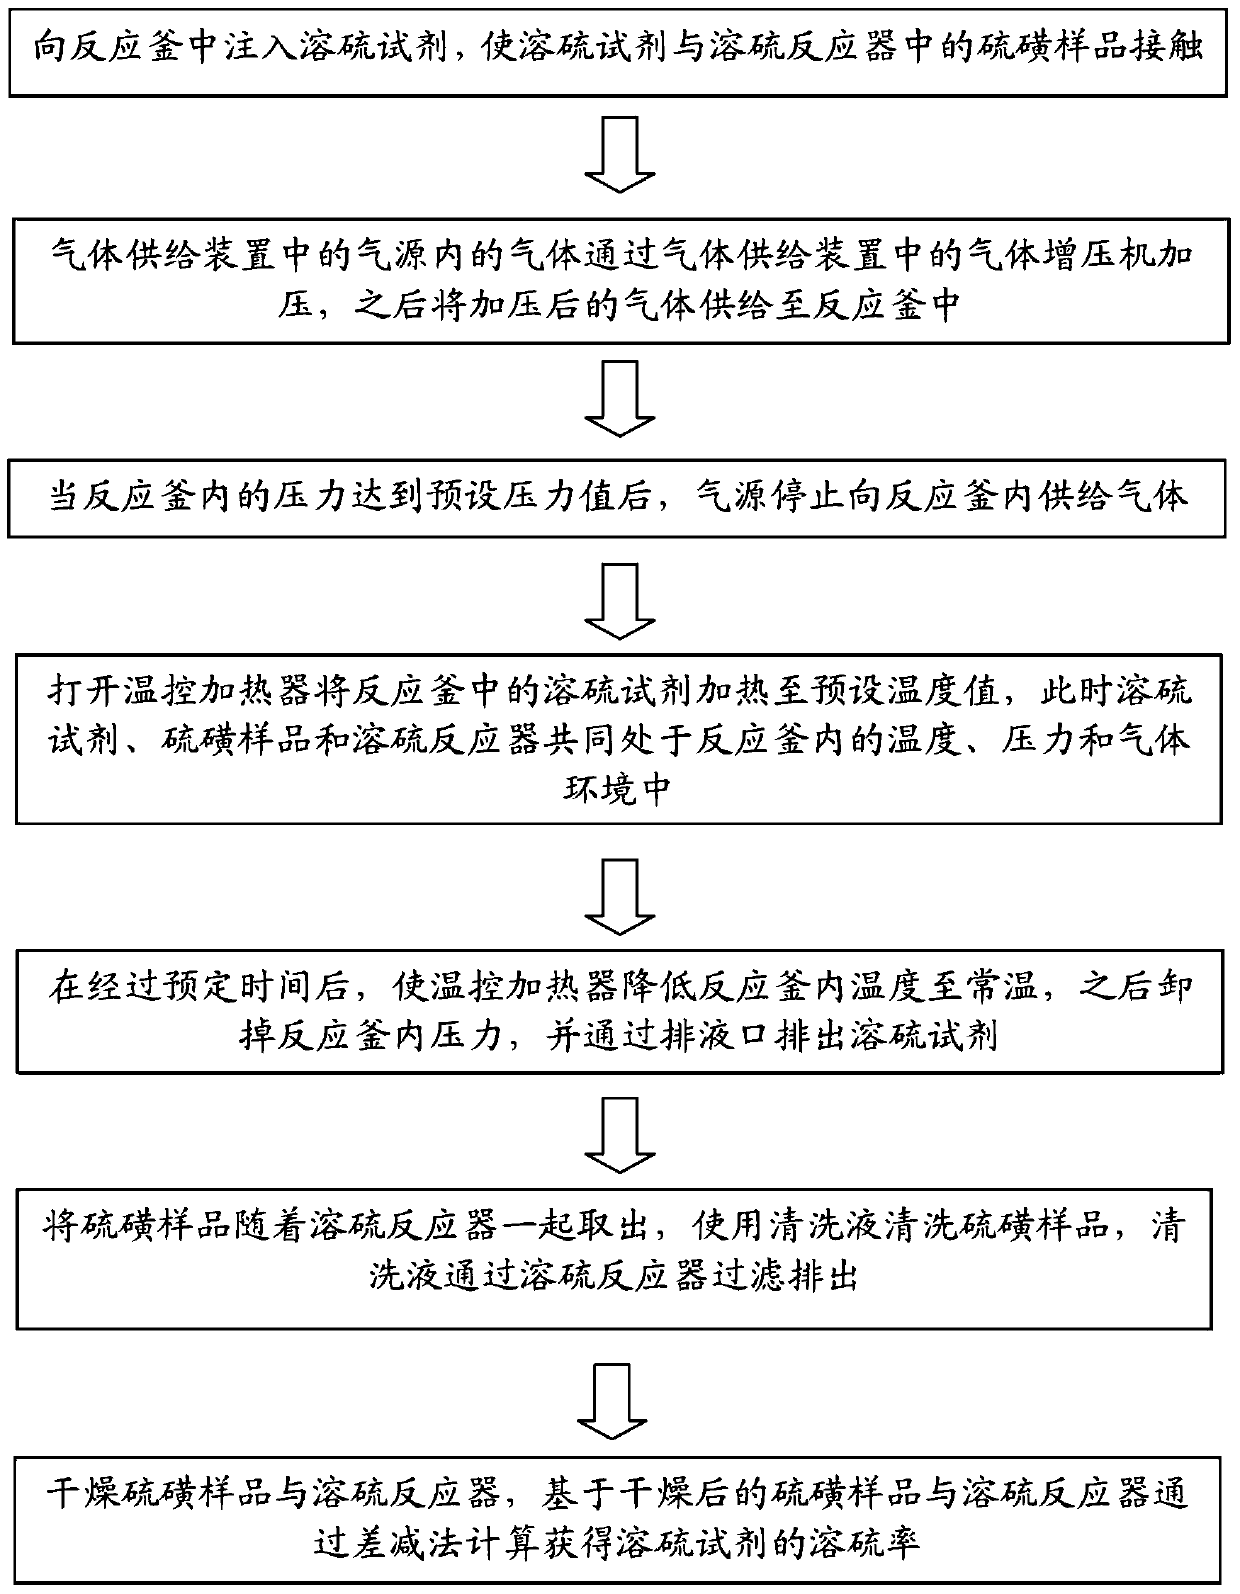 Sulfur-dissolving agent evaluation device and method of using same